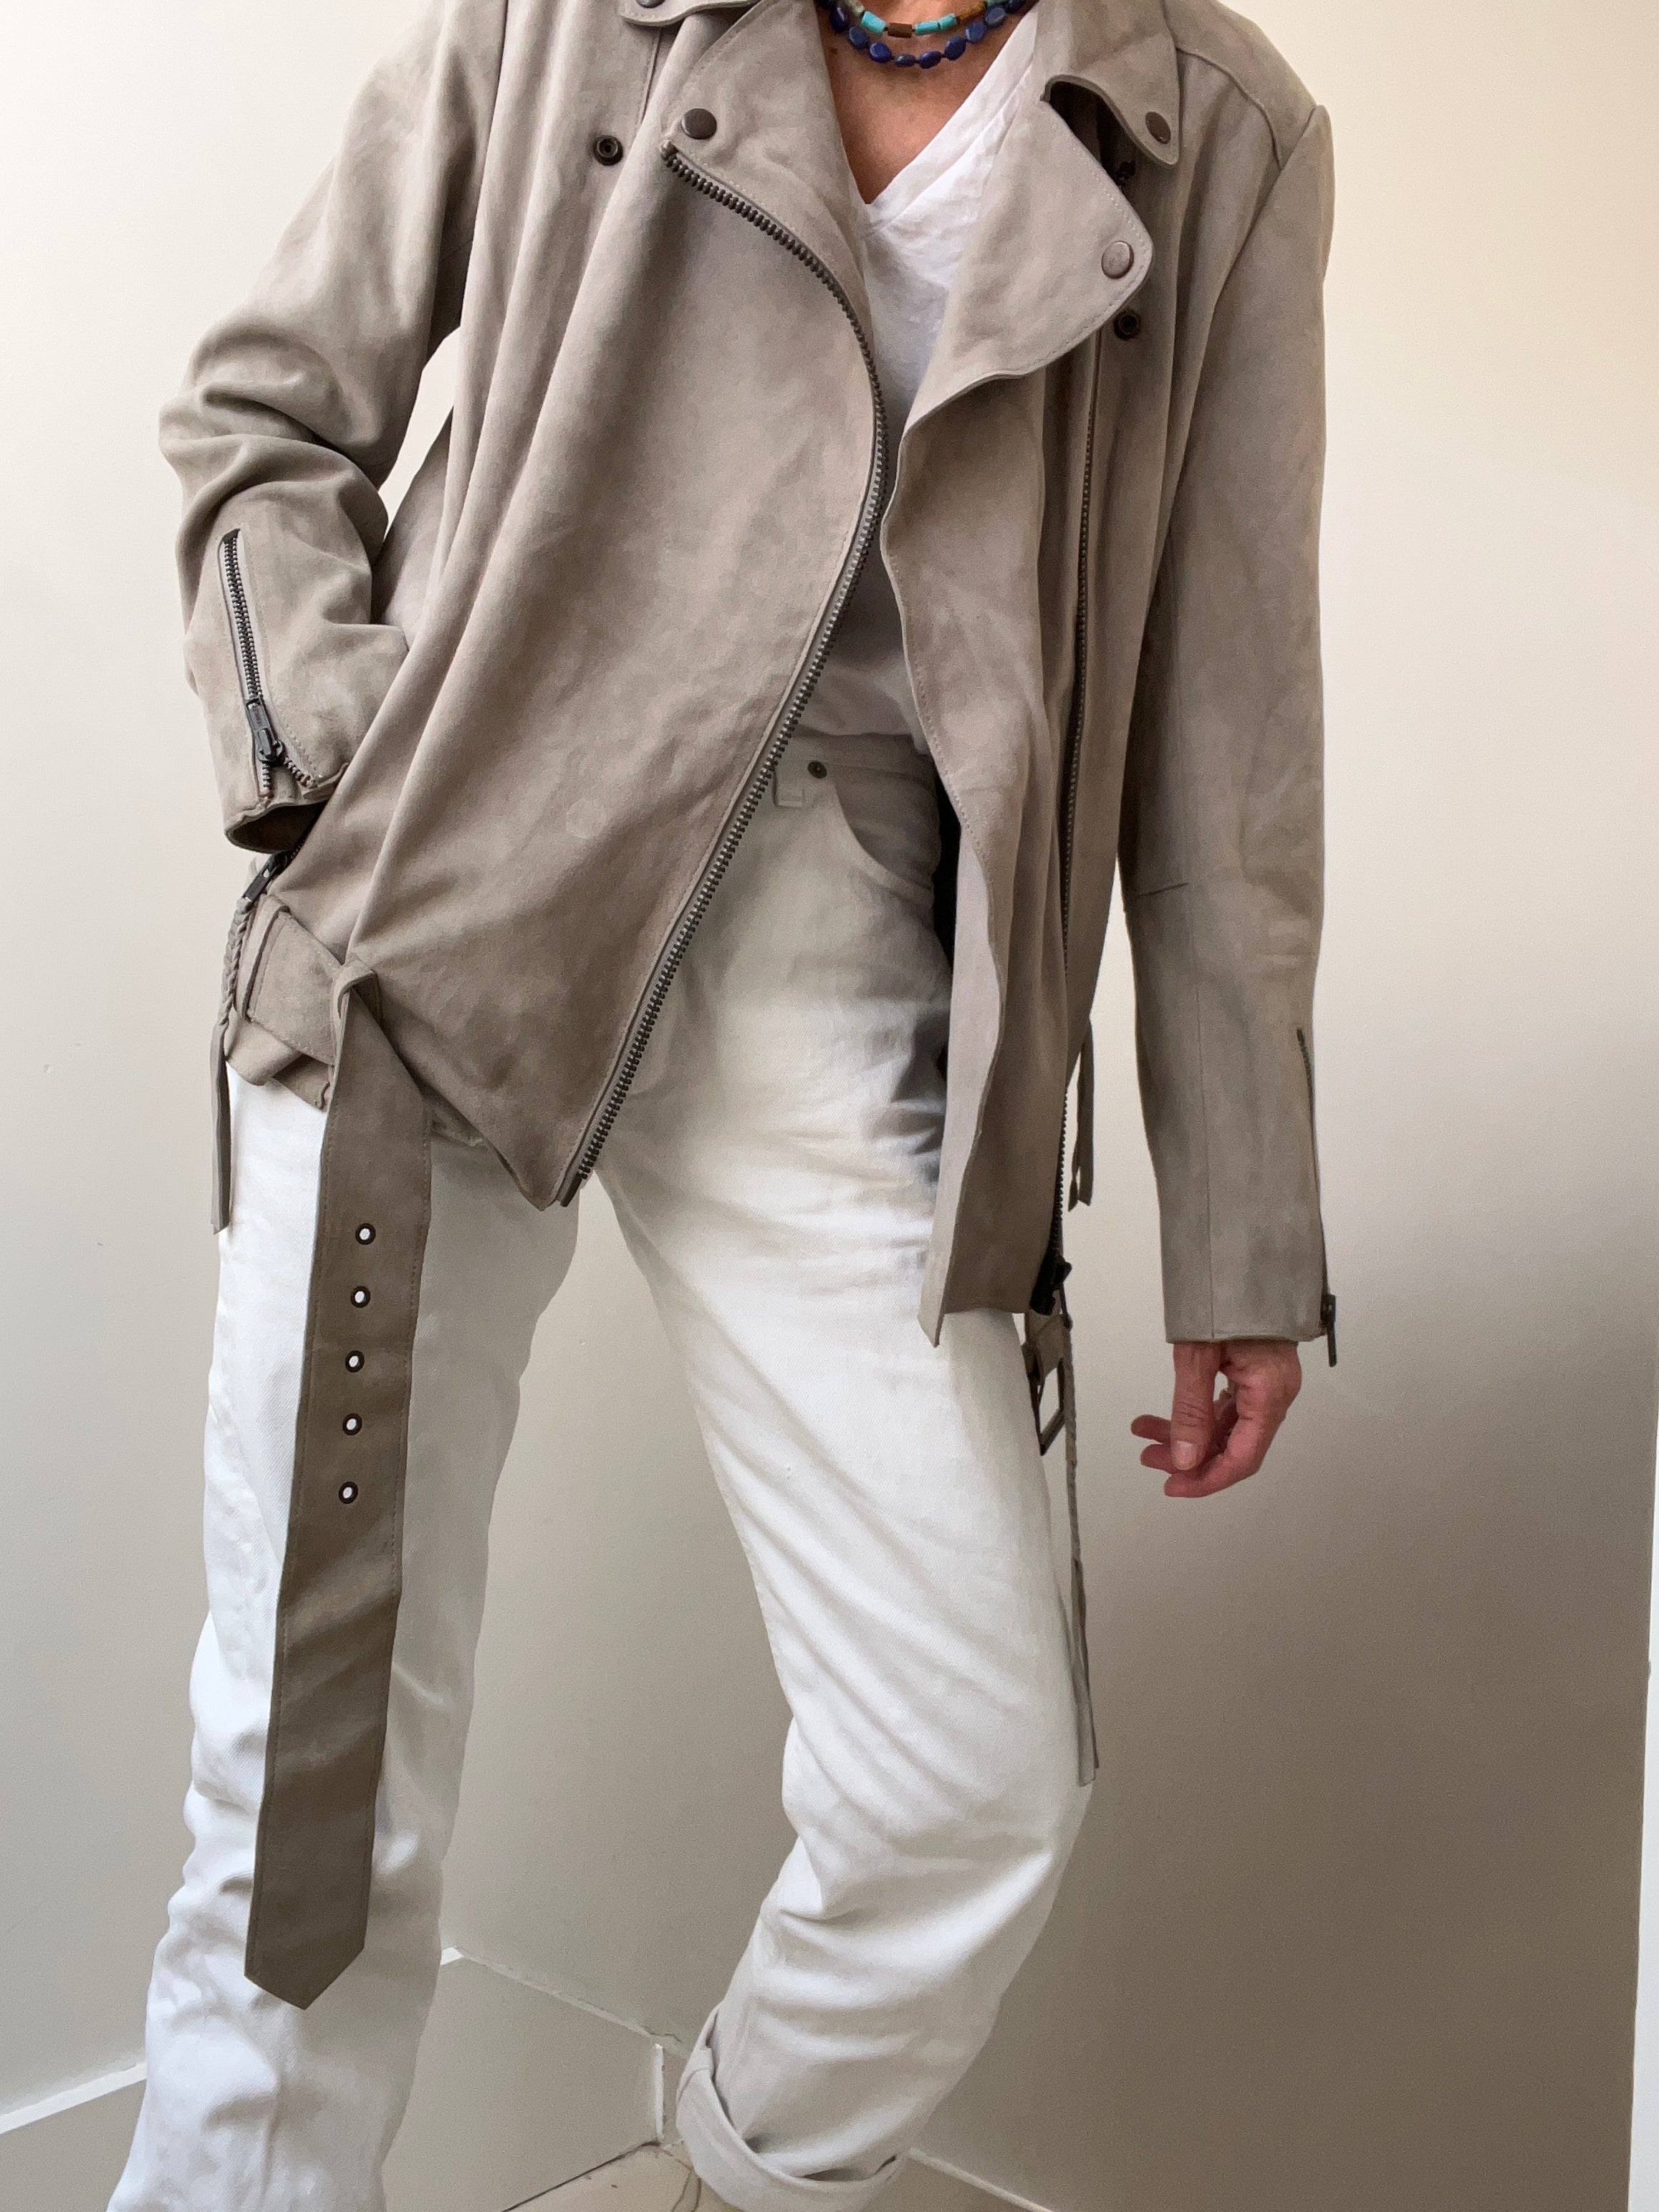 Not specified Jackets Medium Soft Grey Suede Jacket